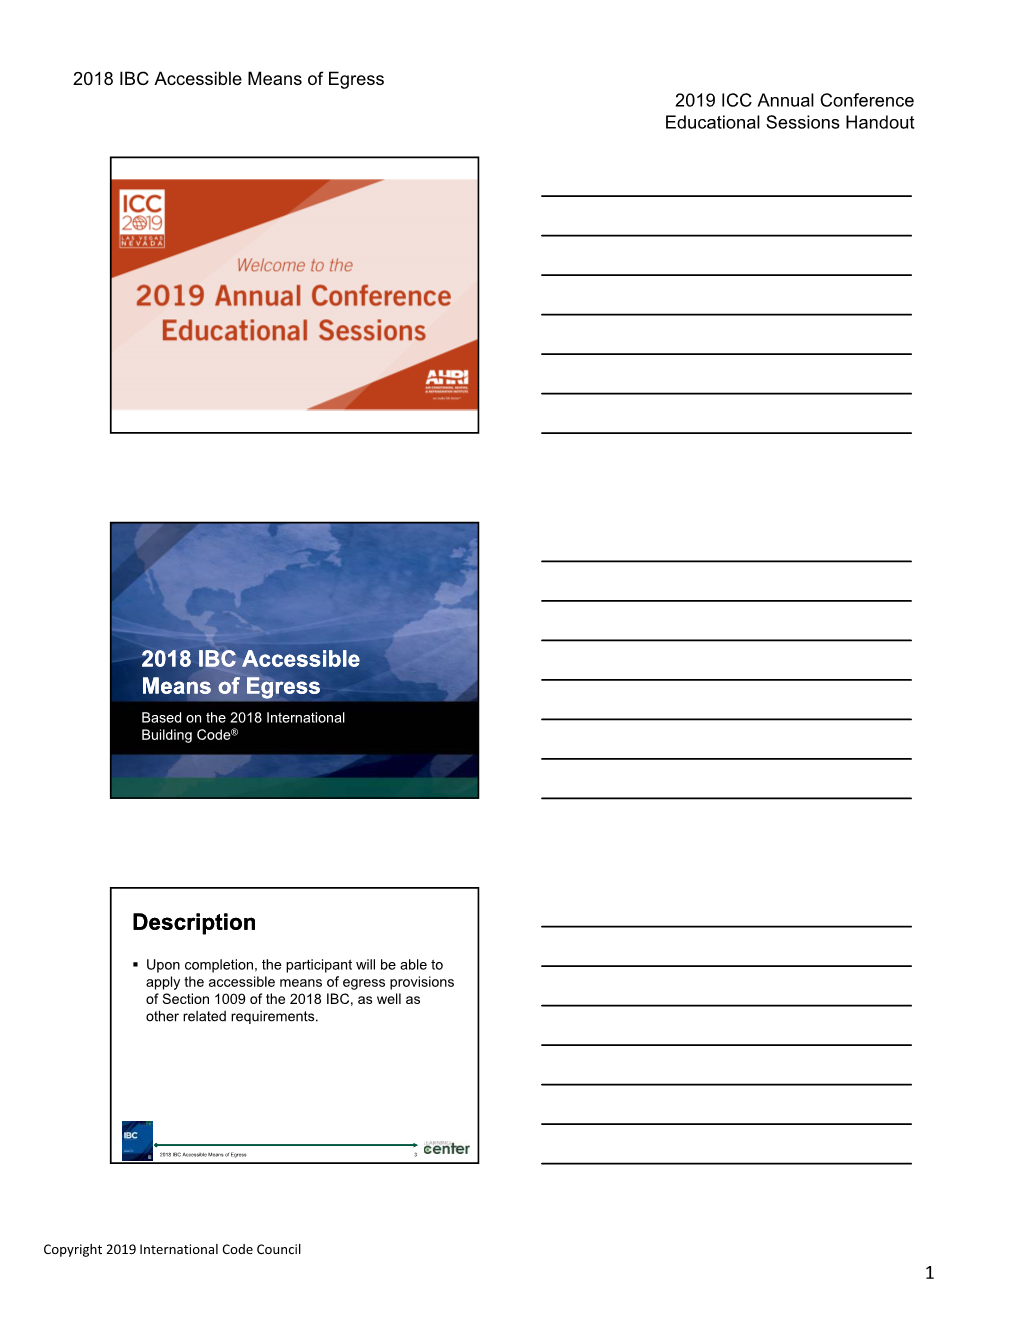 Accessible Means of Egress 2019 ICC Annual Conference Educational Sessions Handout